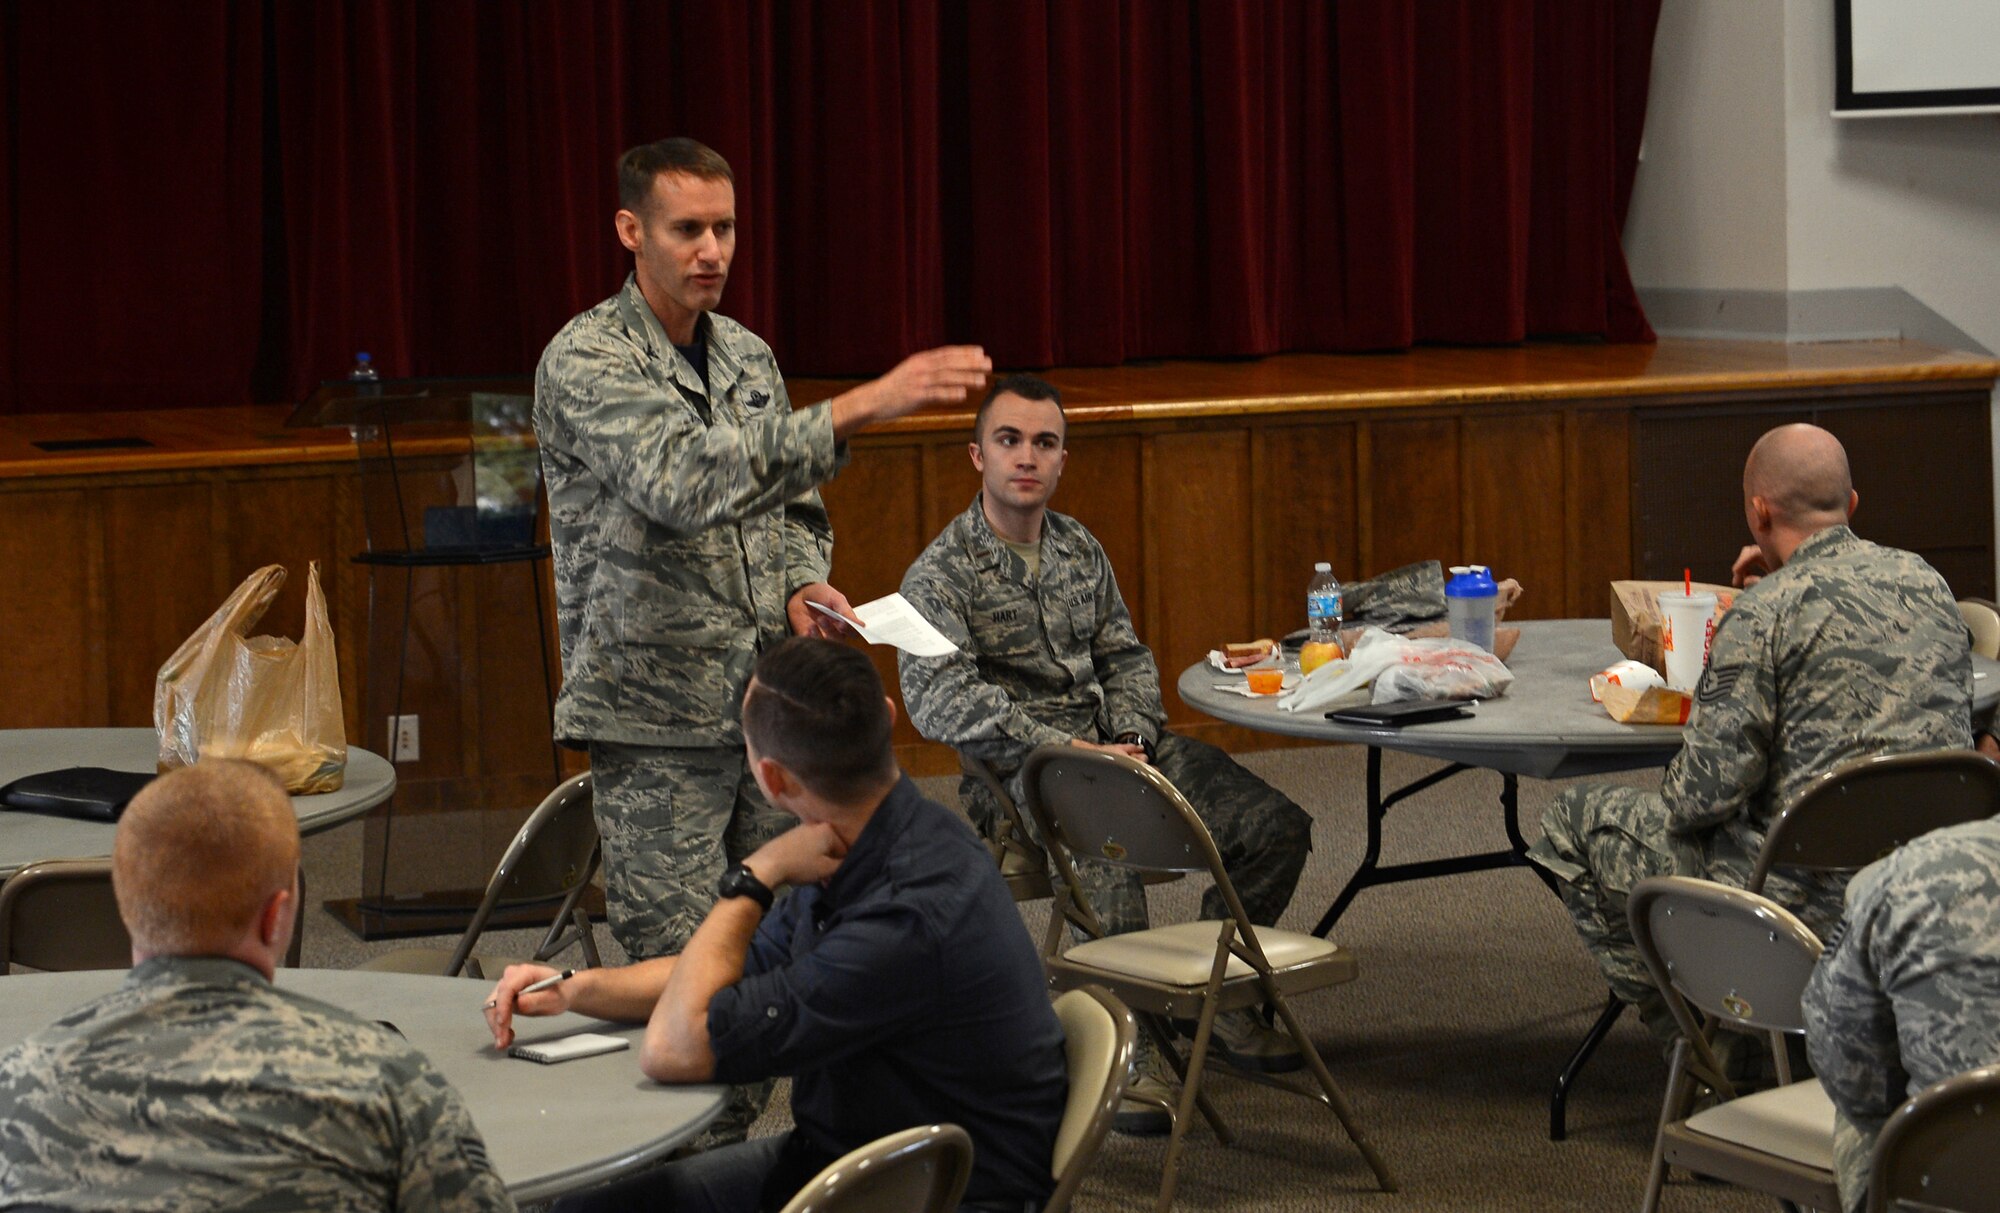 Col. Stephen Snelson, 62nd Airlift Wing vice commander, speaks to Airmen attending a Lunch and Leadership Lecture Nov. 4, 2016, at Joint Base Lewis-McChord, Wash. The first of an ongoing series, the training was held to provide relevant informal leadership advice to Airmen of all ranks. (U.S. Air Force photo/Senior Airman Jacob Jimenez) 